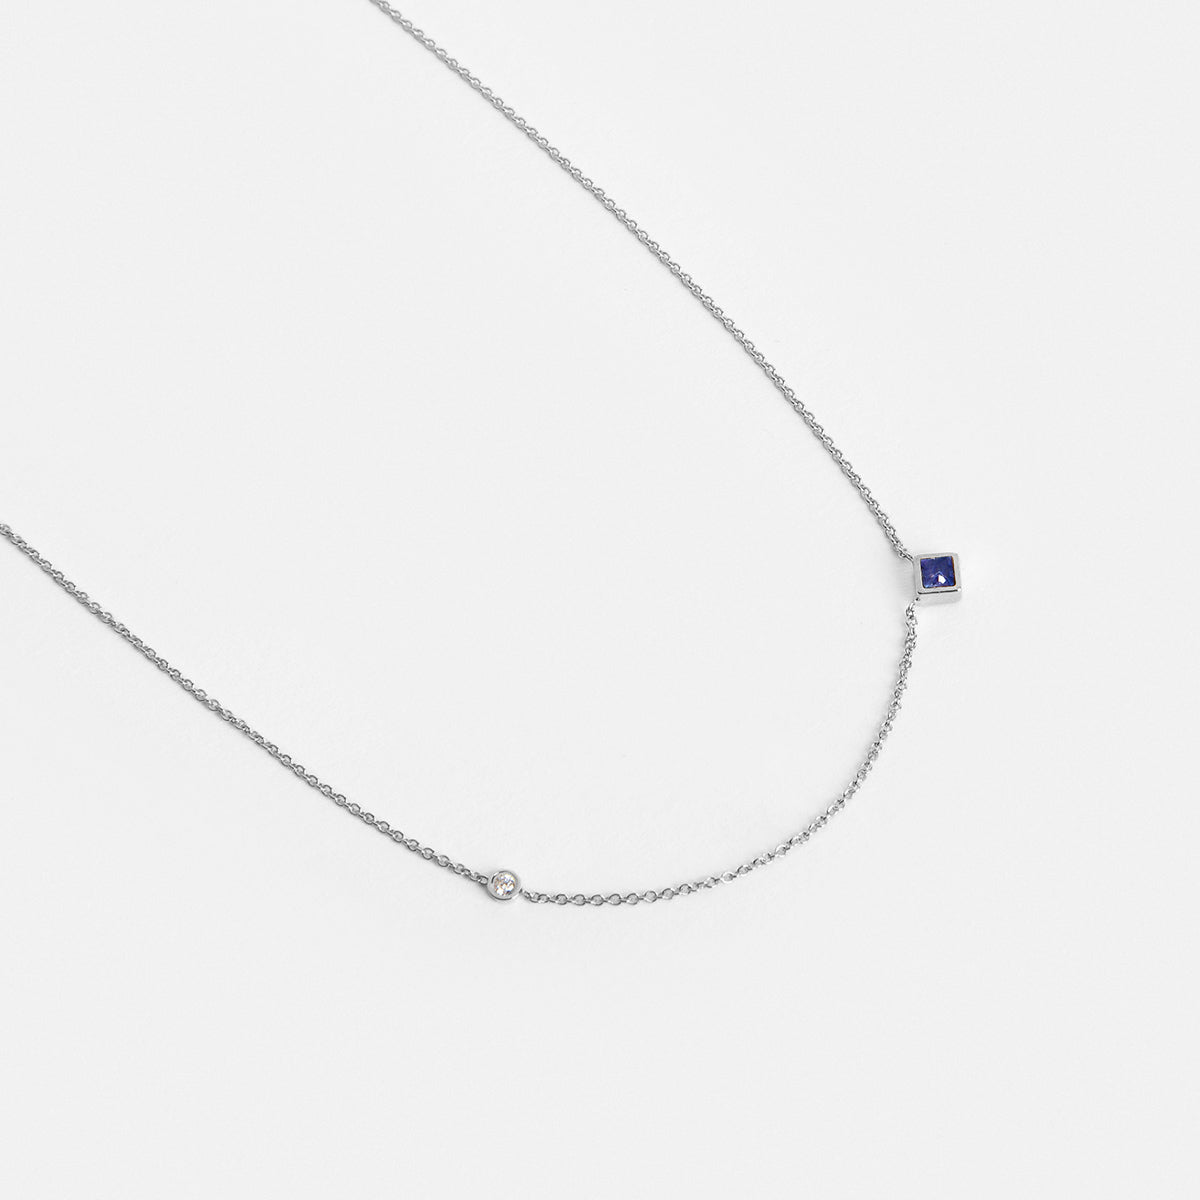 Isu Unique Necklace in 14k White Gold set with Sapphire and White Diamond By SHW Fine Jewelry NYC